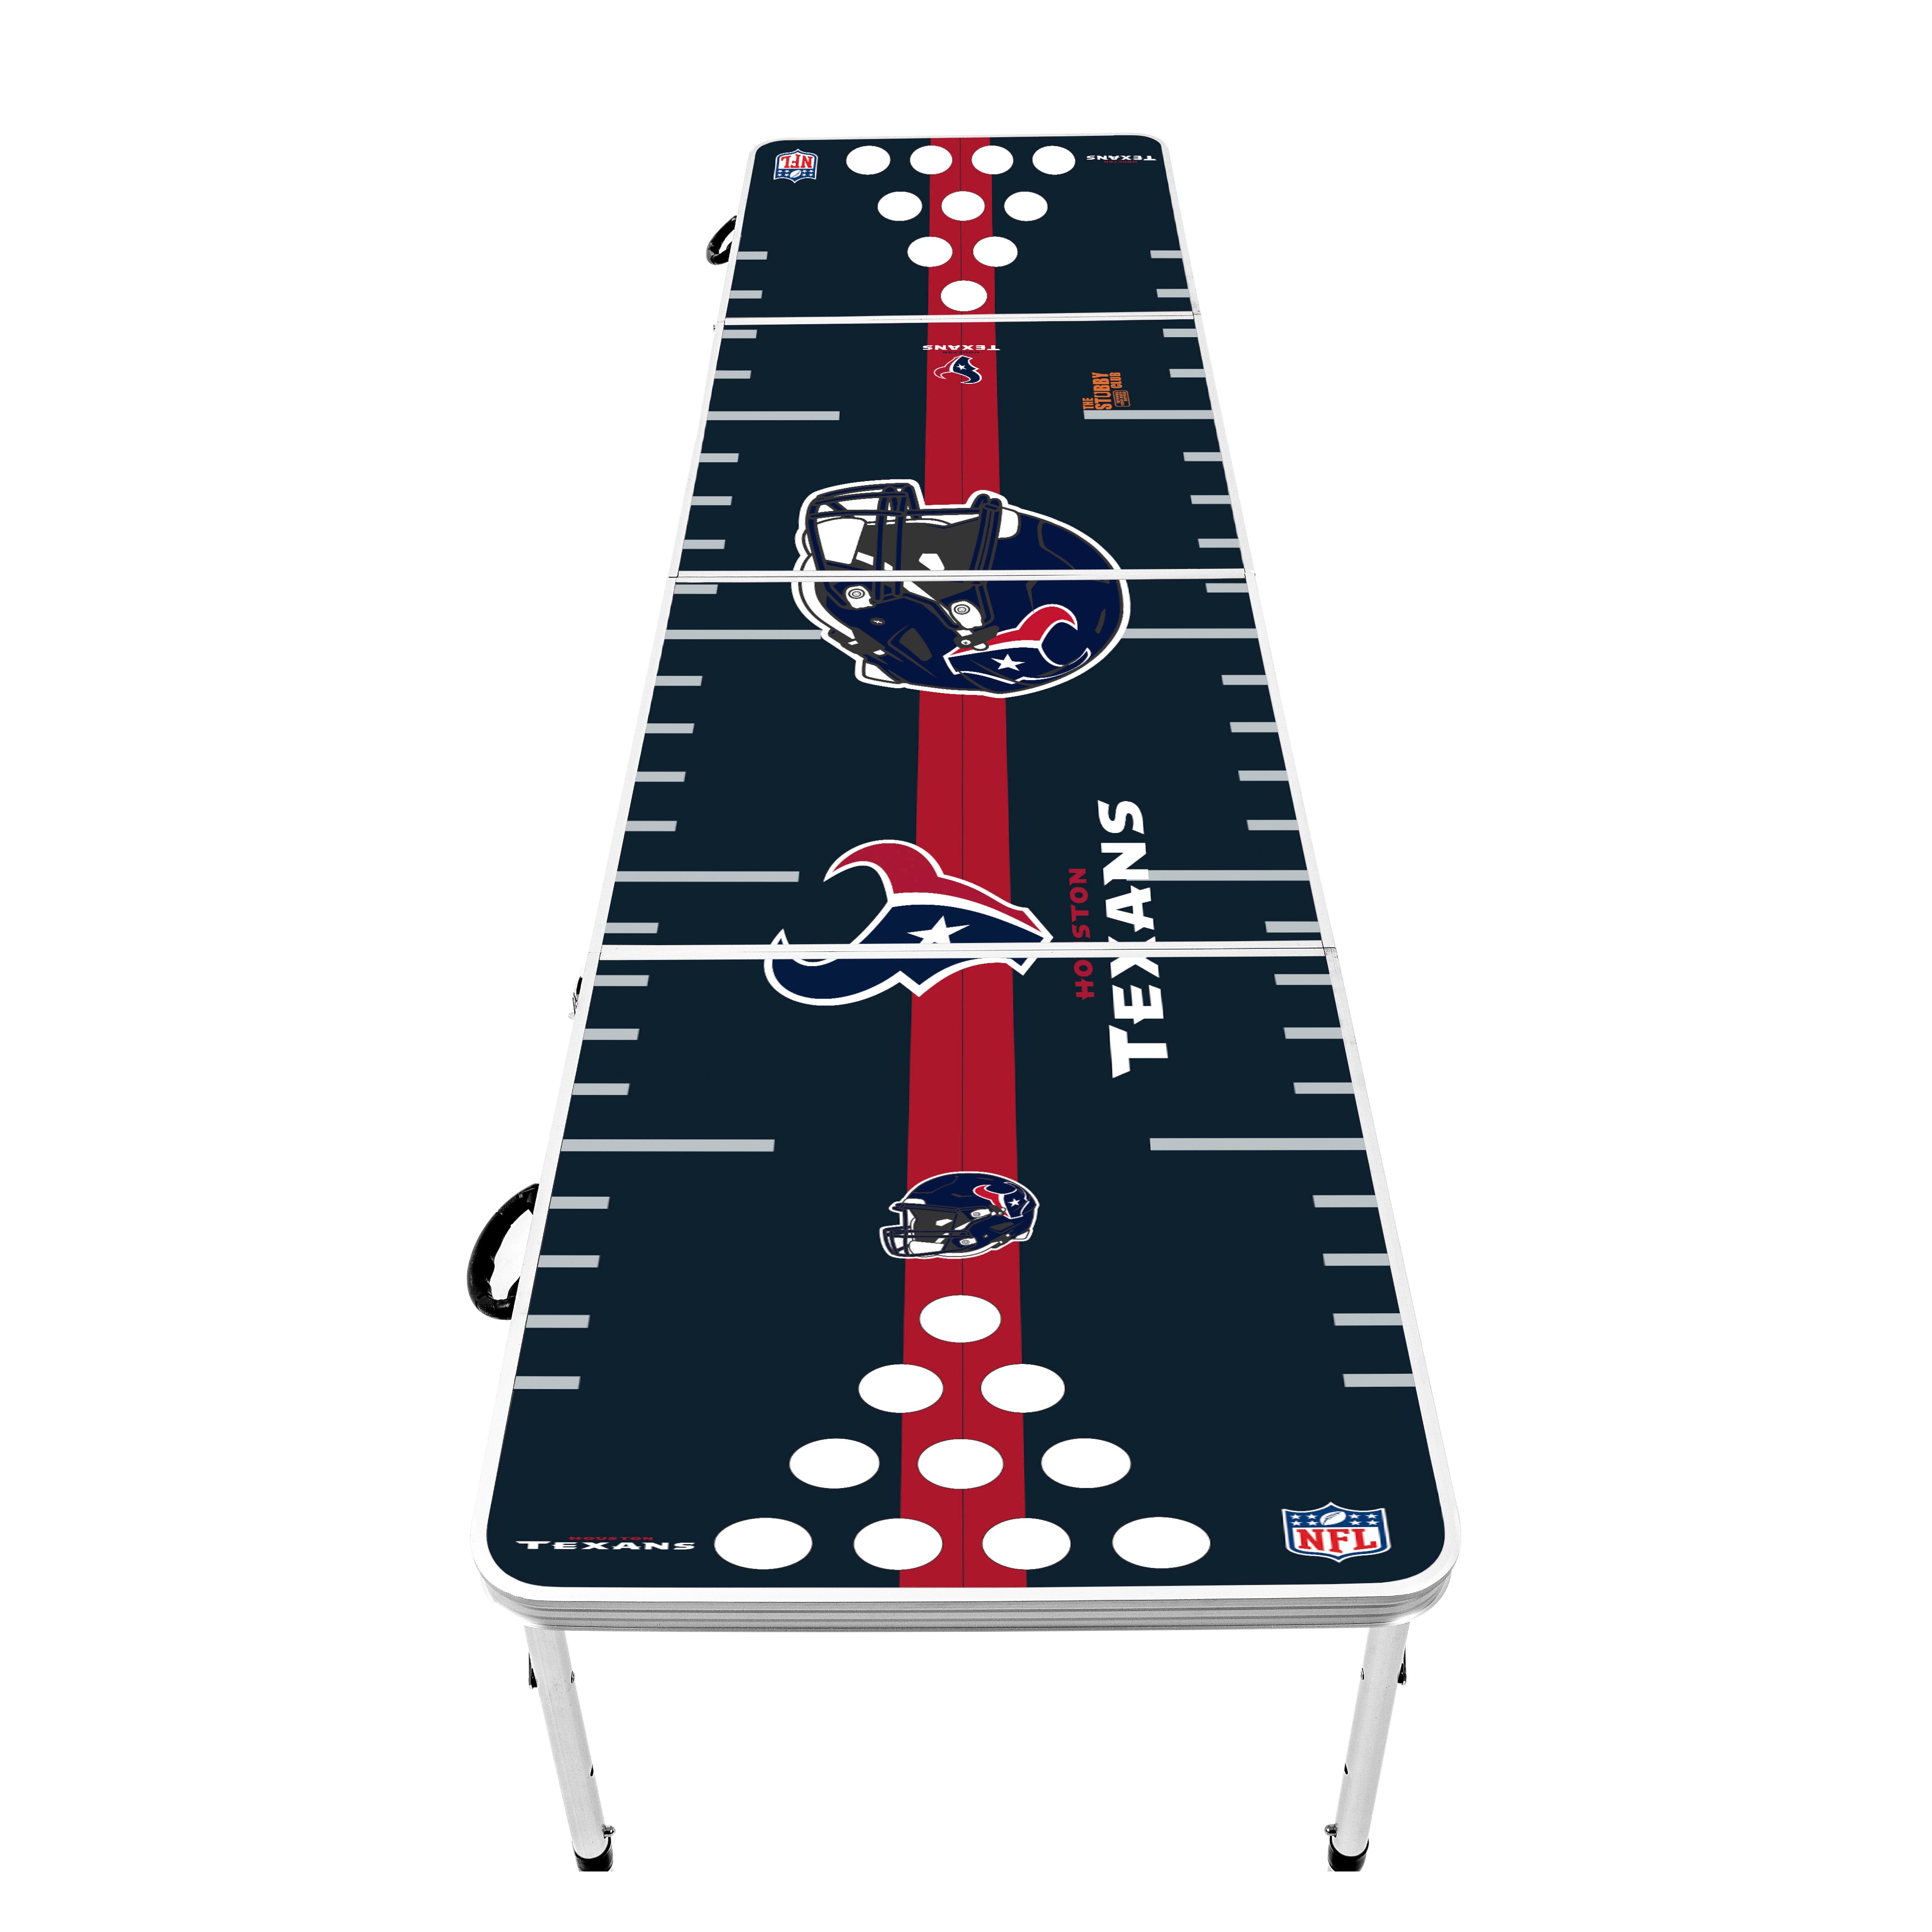 Houston Texans NFL Beer Pong Table